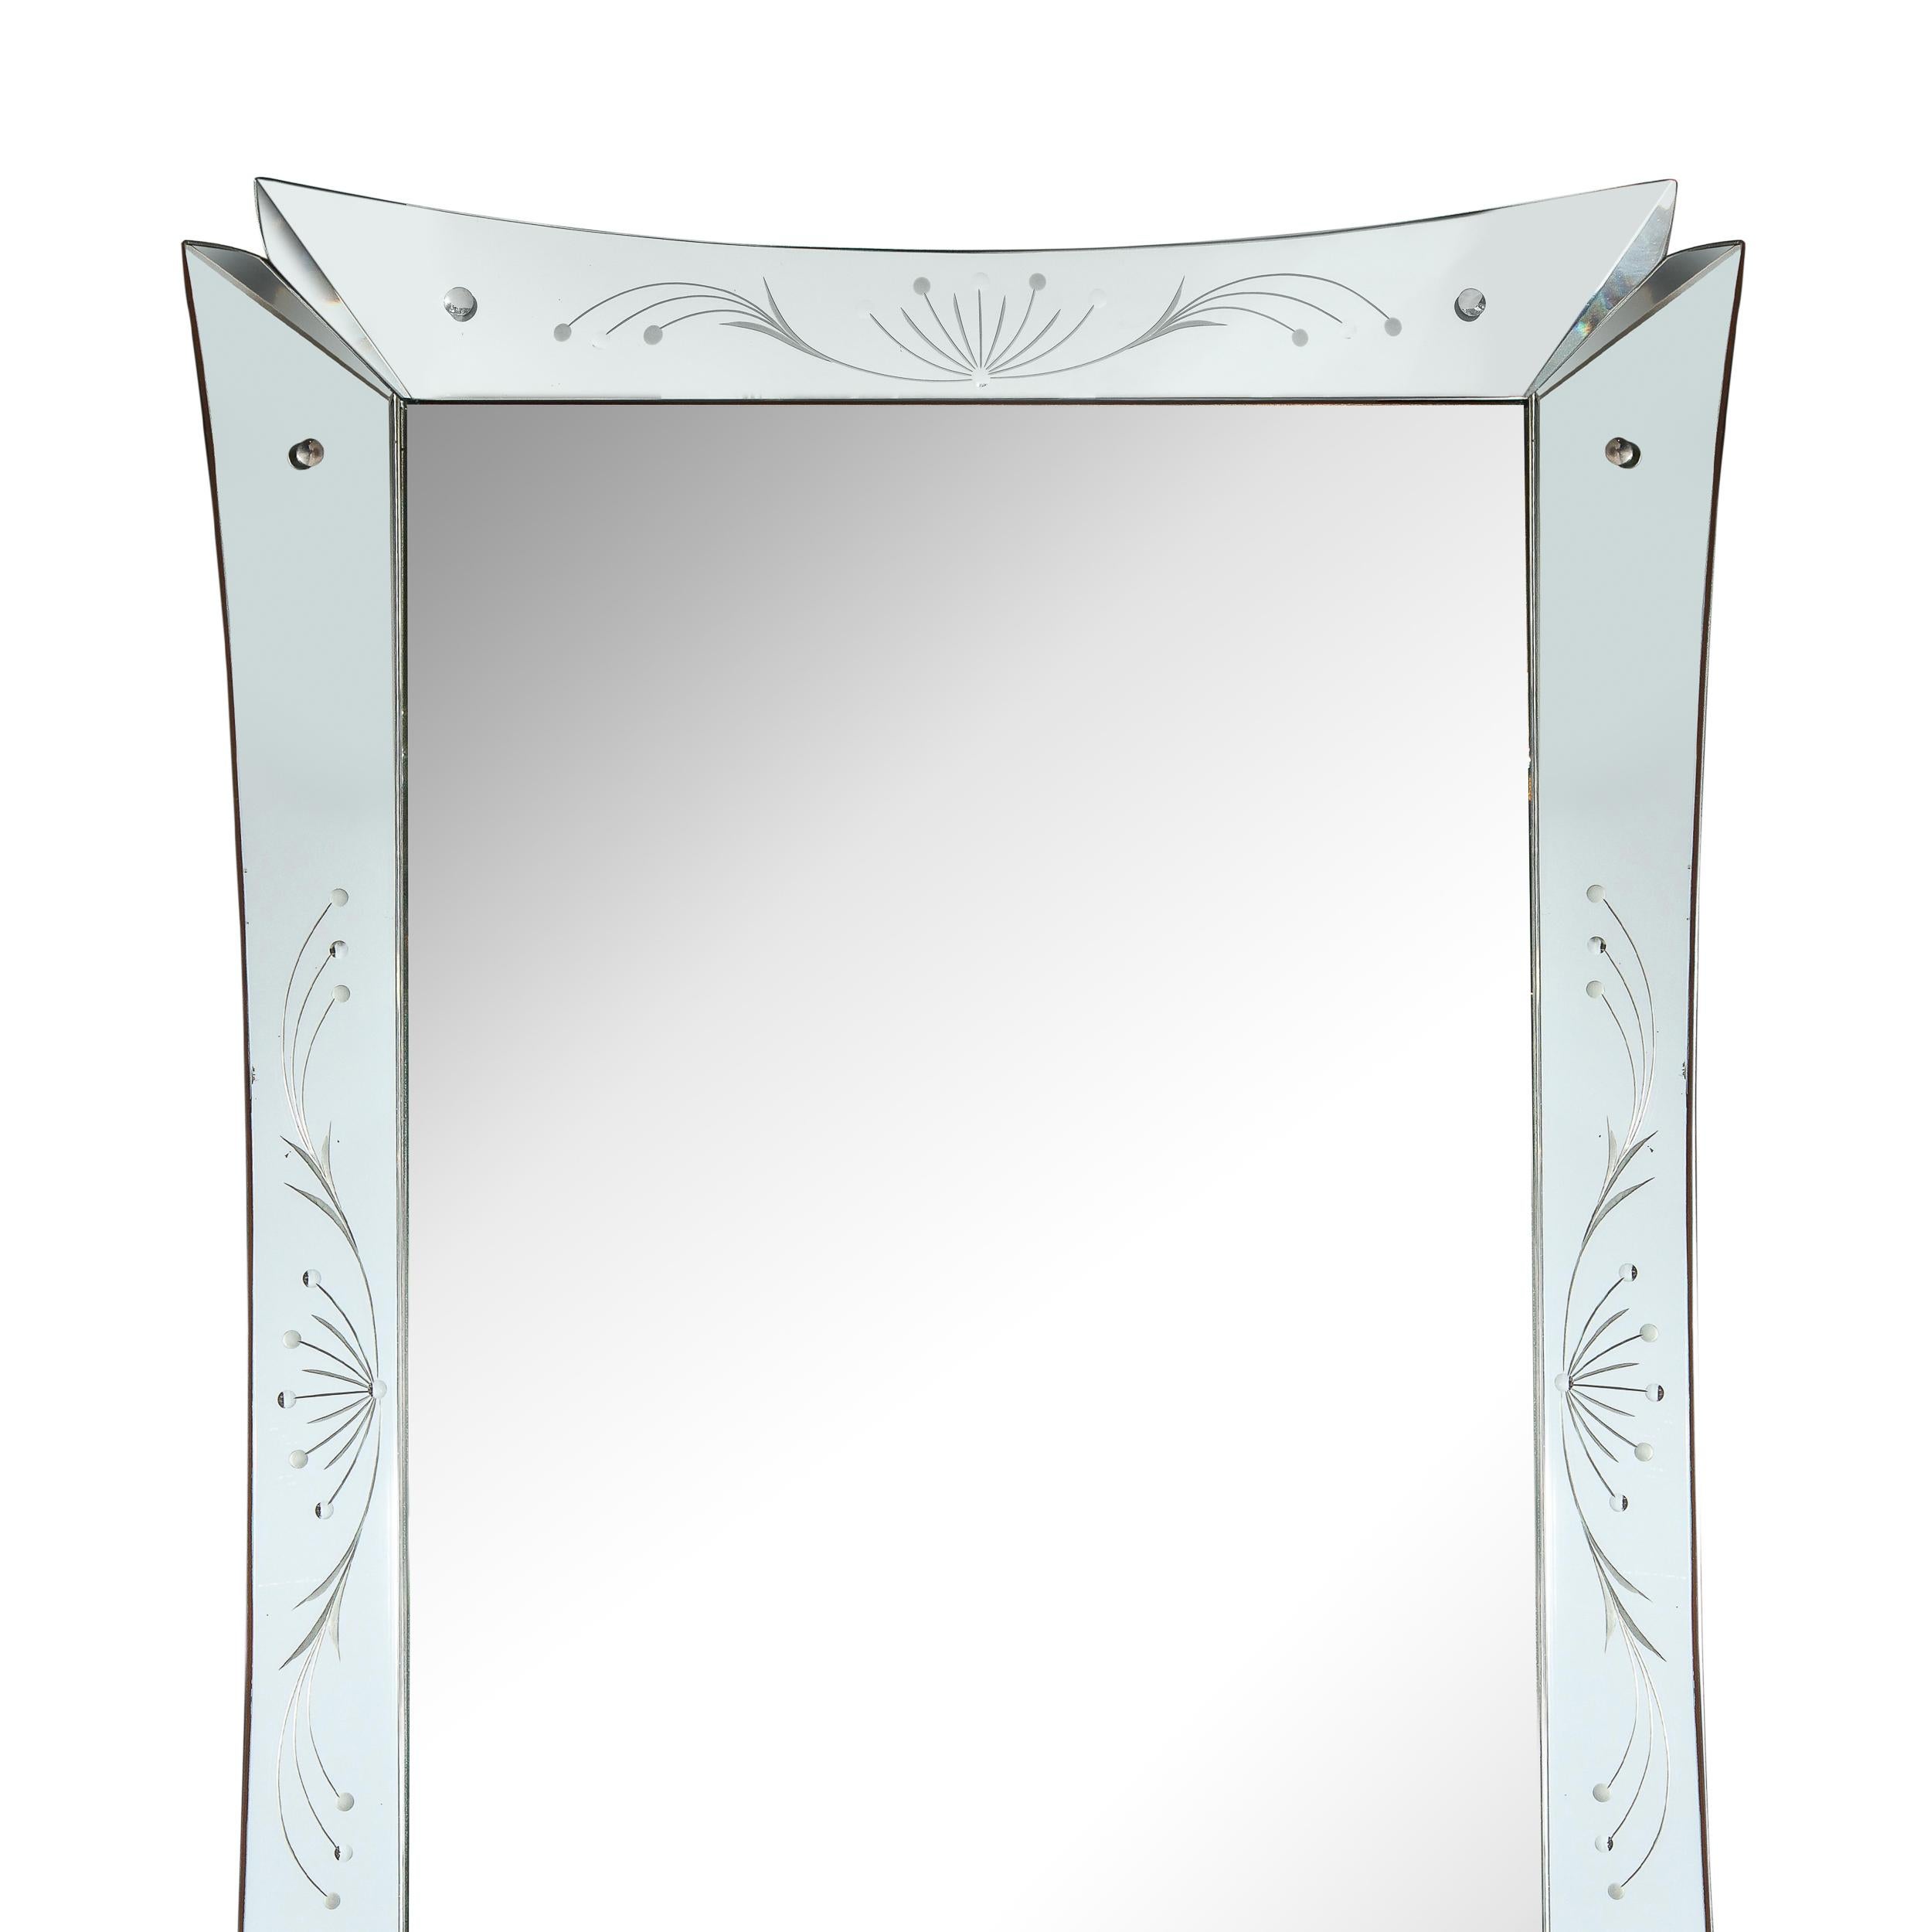 This stunning Mid-Century Modern mirror was realized in the United States circa 1950. It features etched stylized foliate patterns- offering flowing curvilinear lines capped with circular forms- on each of the four panels, along with circular nickel